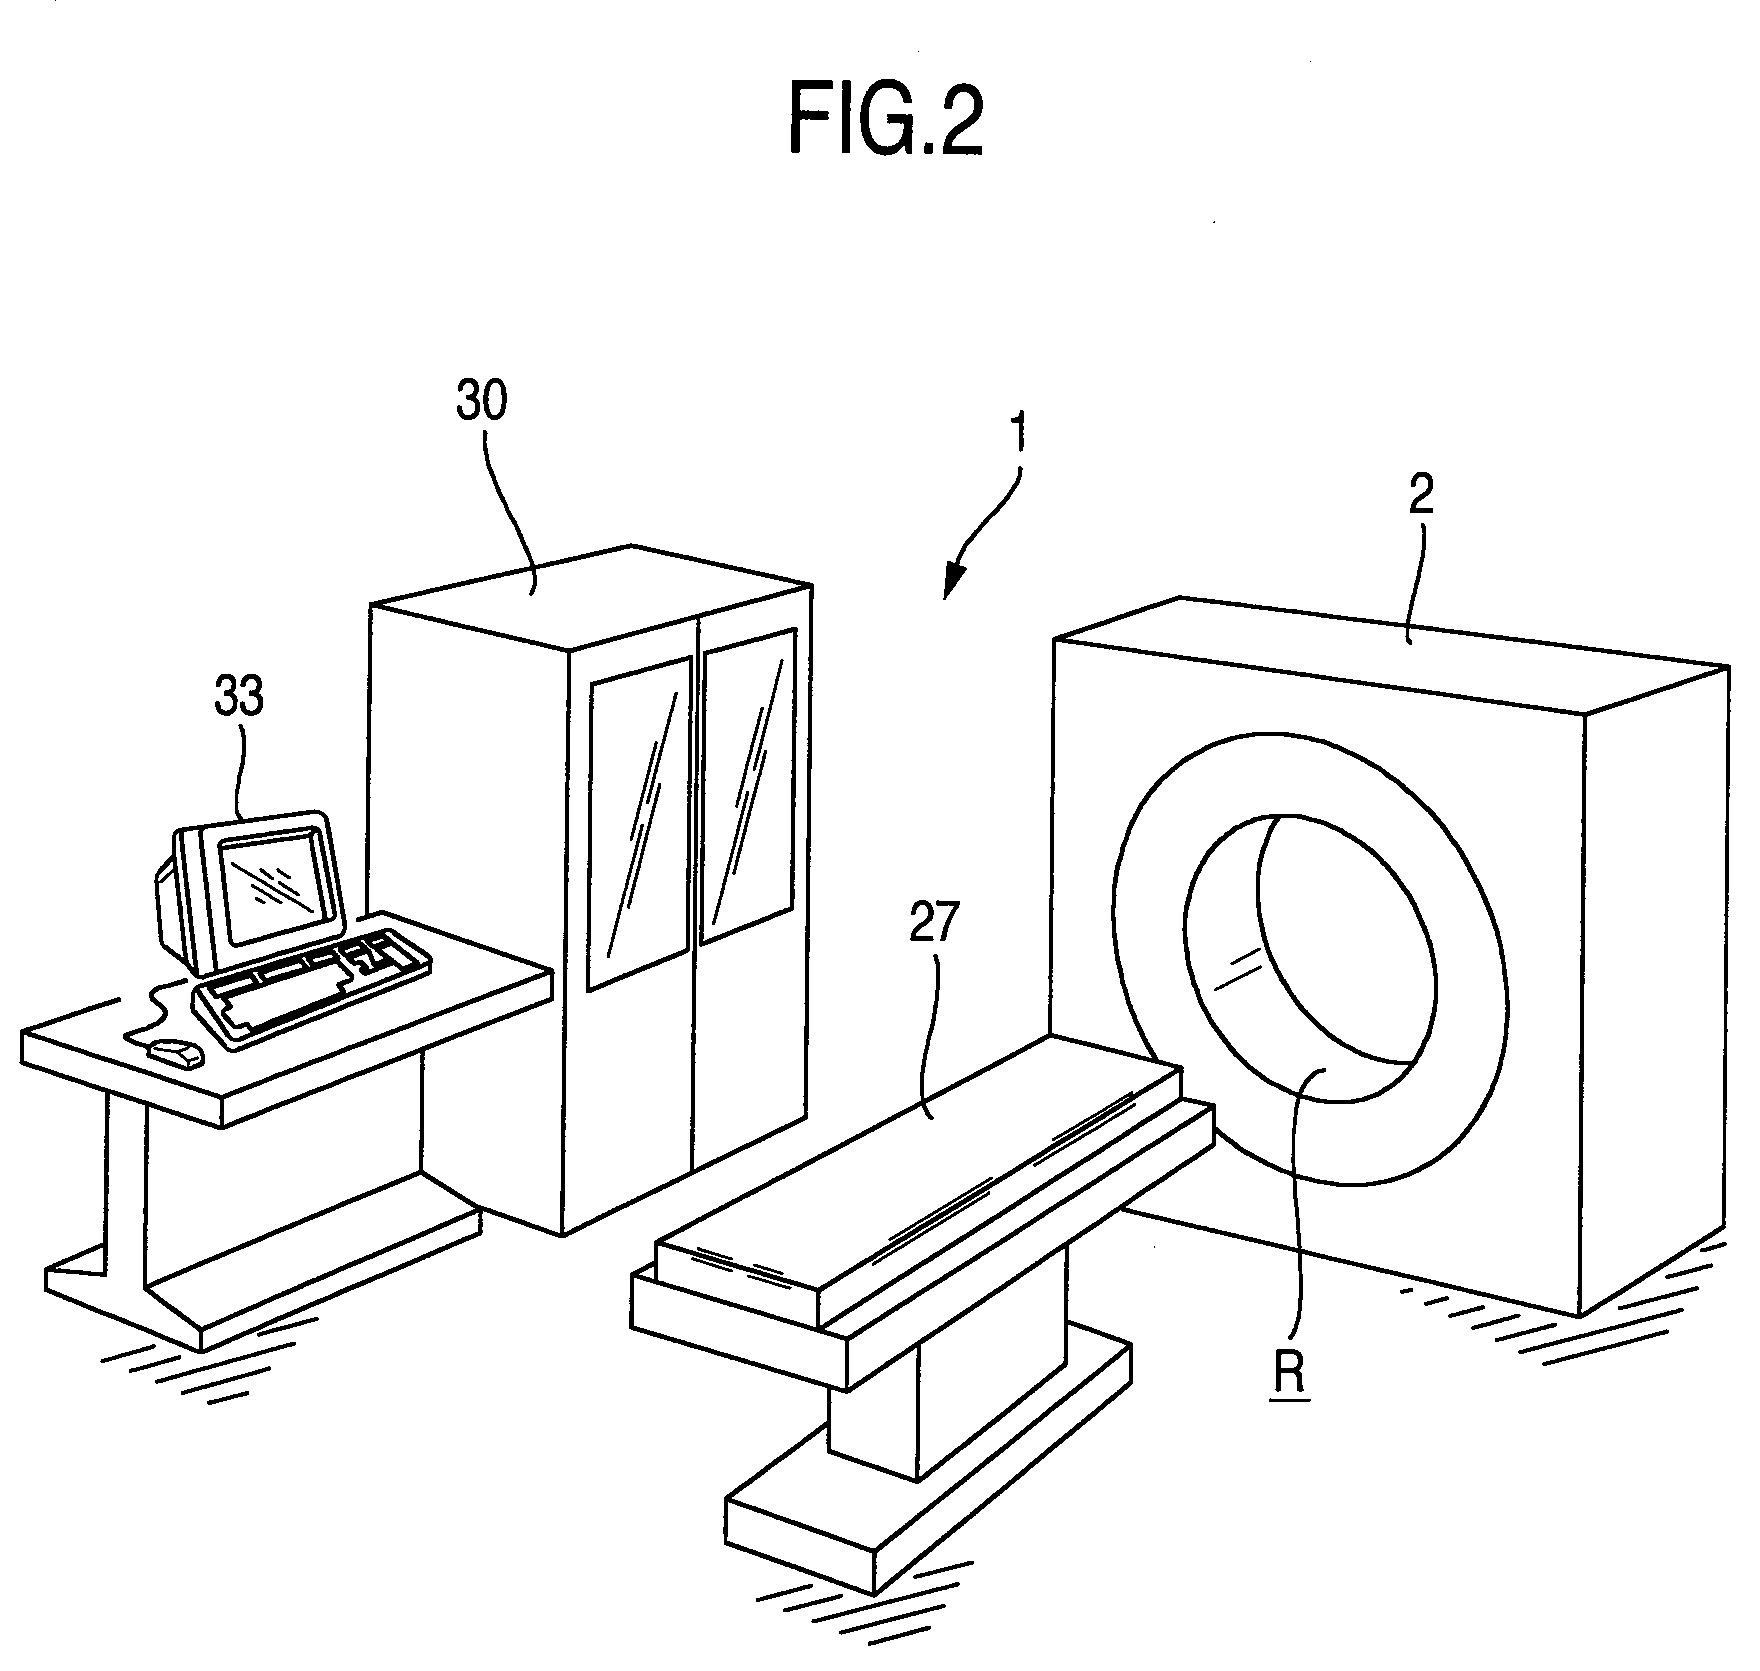 Image generation method and device for emission computed tomography